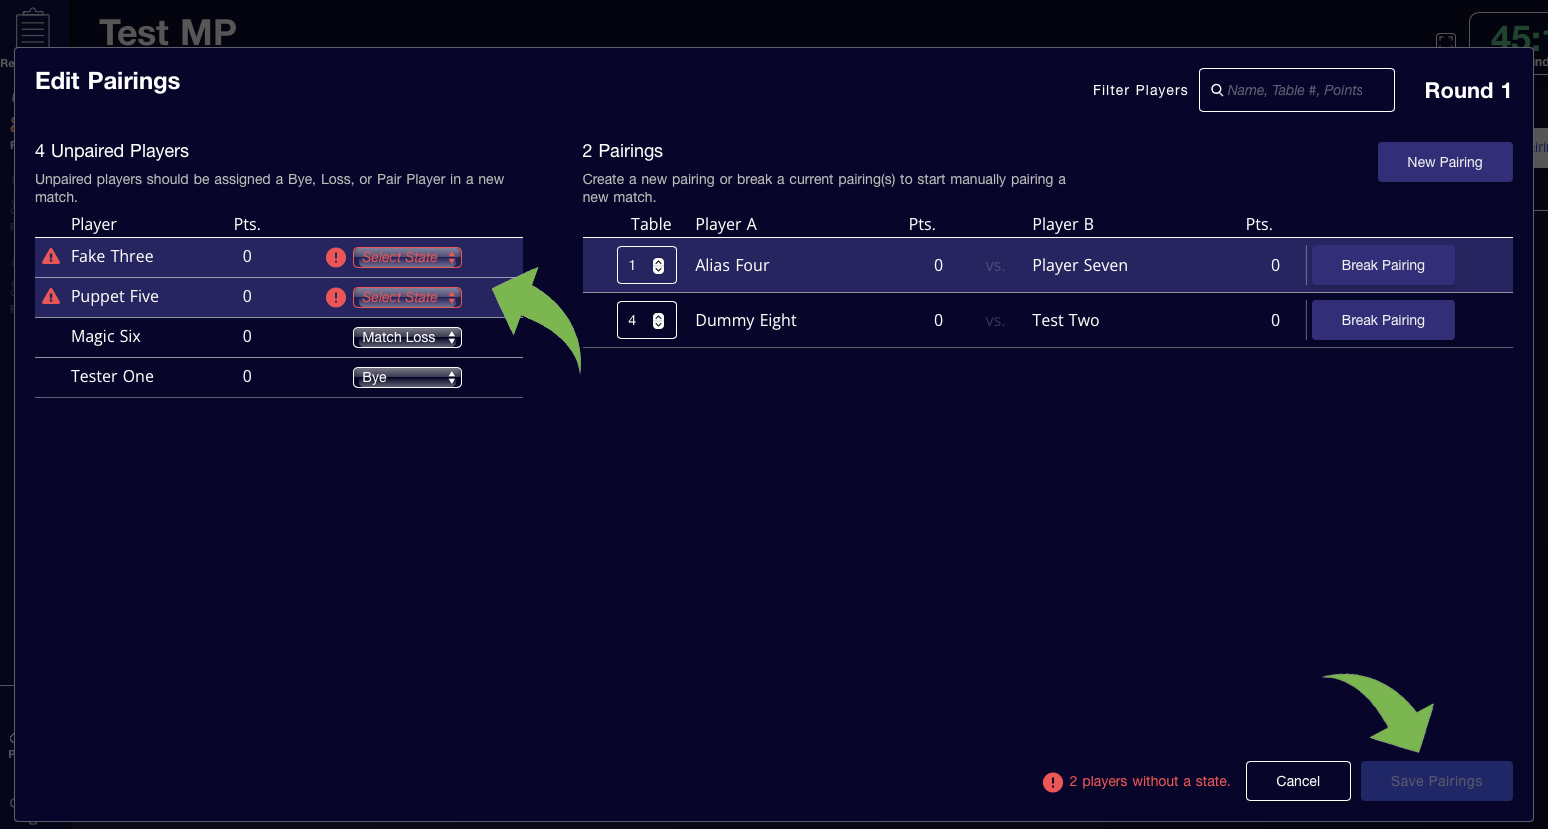 A screenshot of a test EventLink store showing the Edit Pairings menu